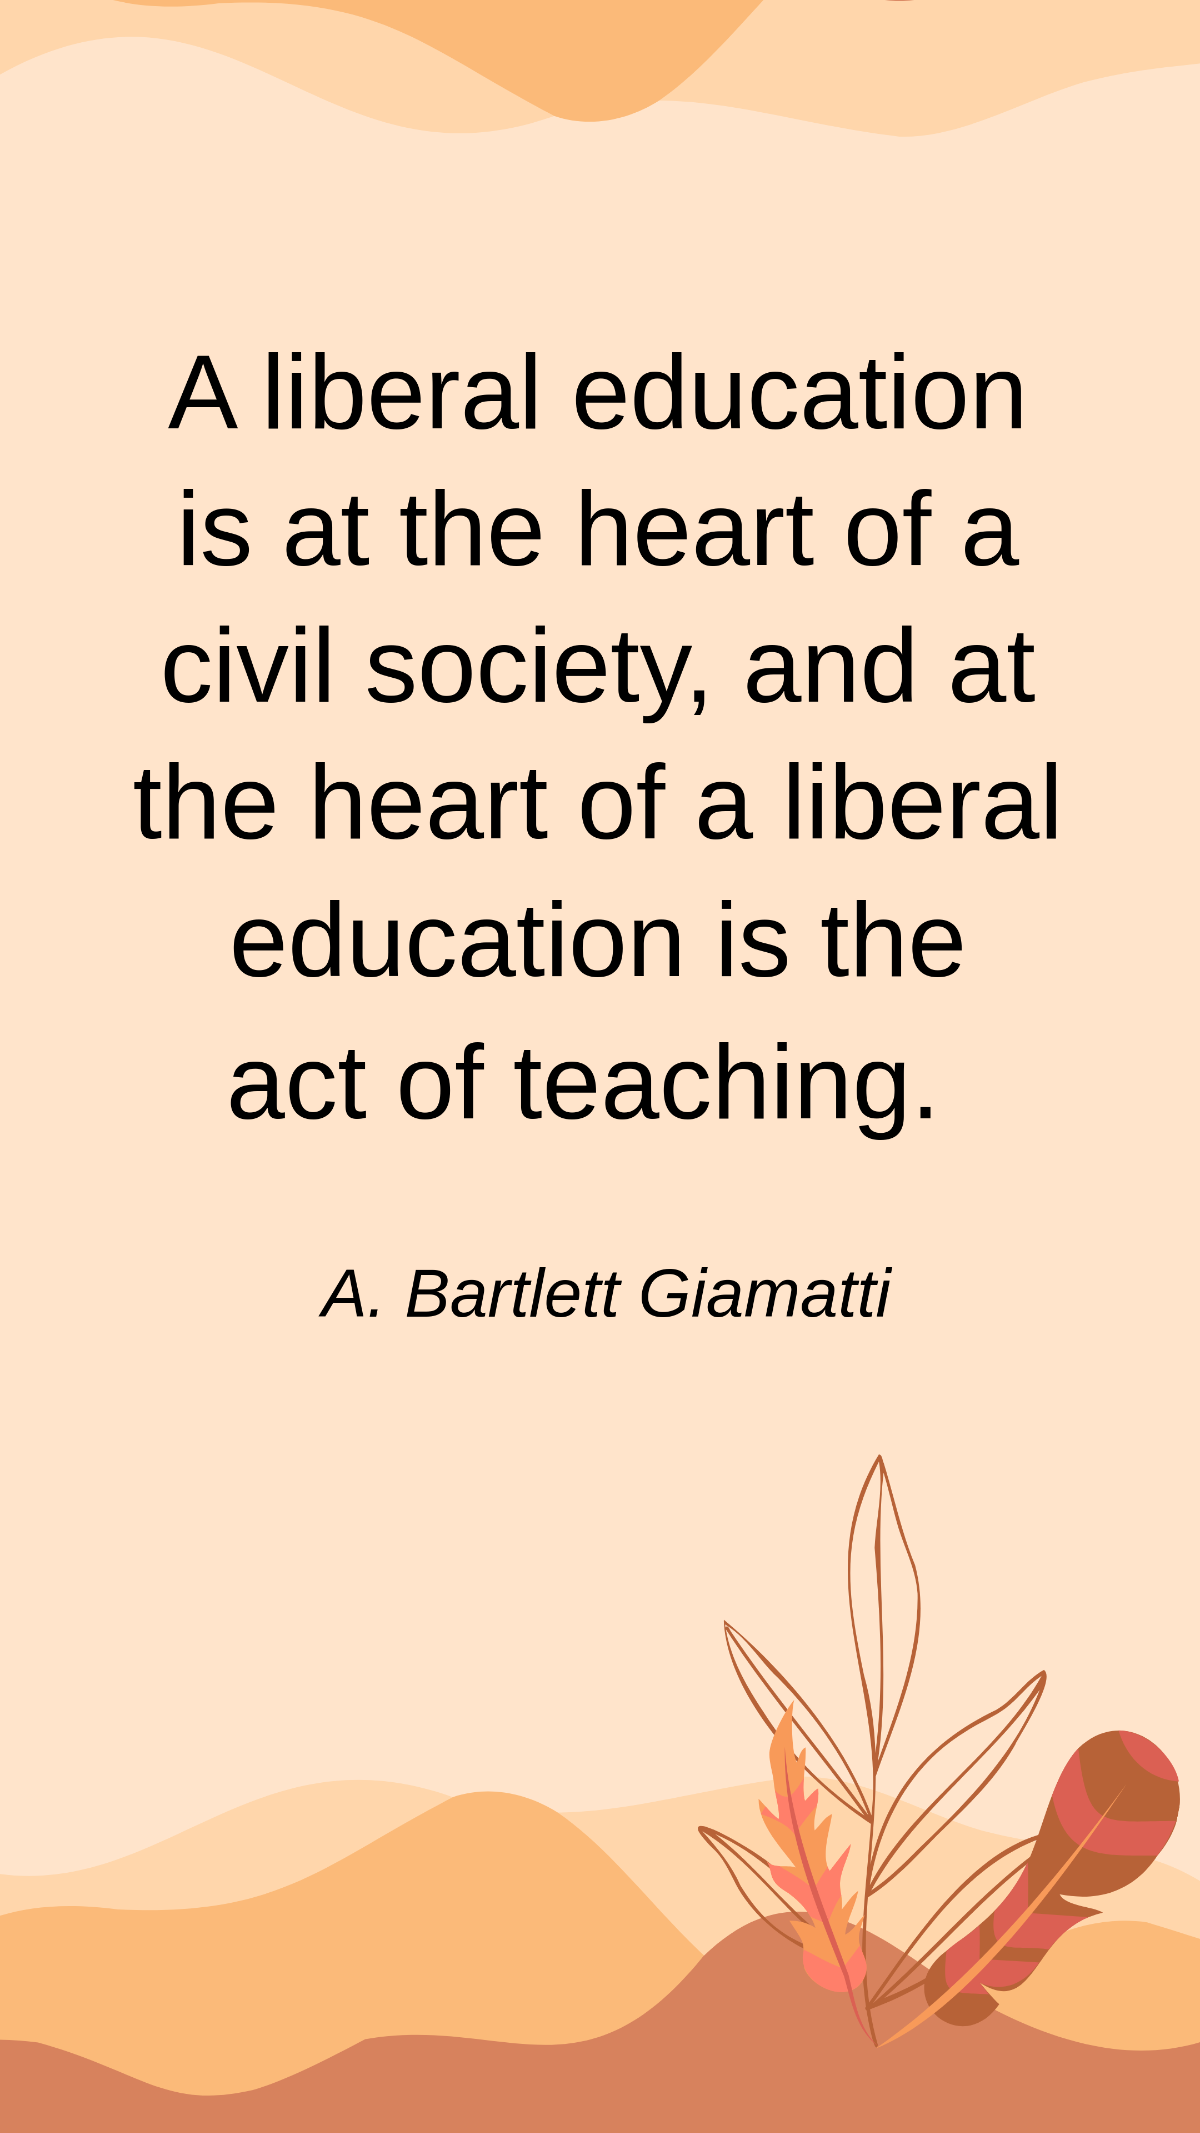 A. Bartlett Giamatti - A liberal education is at the heart of a civil society, and at the heart of a liberal education is the act of teaching. Template